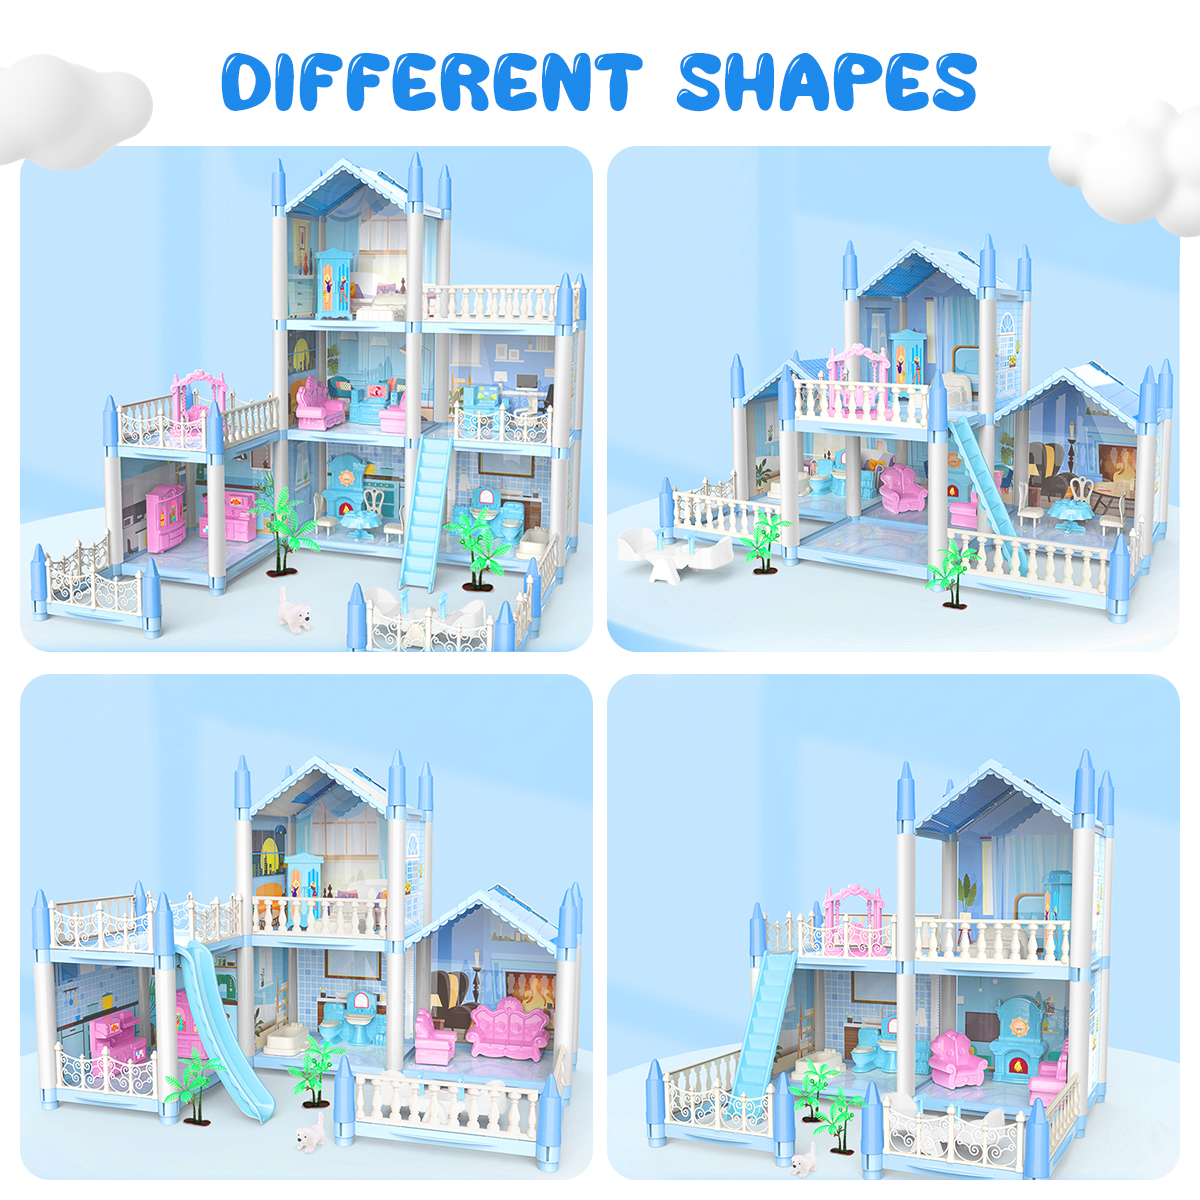 Doll House, Dream House Playset with 100+ Furniture & Accessories, 4 Stories 14 Rooms Building Toys with Movable Slides, Stairs, Pets, Cottage, DIY Creative Gift for 3 4 5 6+ Year Old Girls Toddlers - image 3 of 7